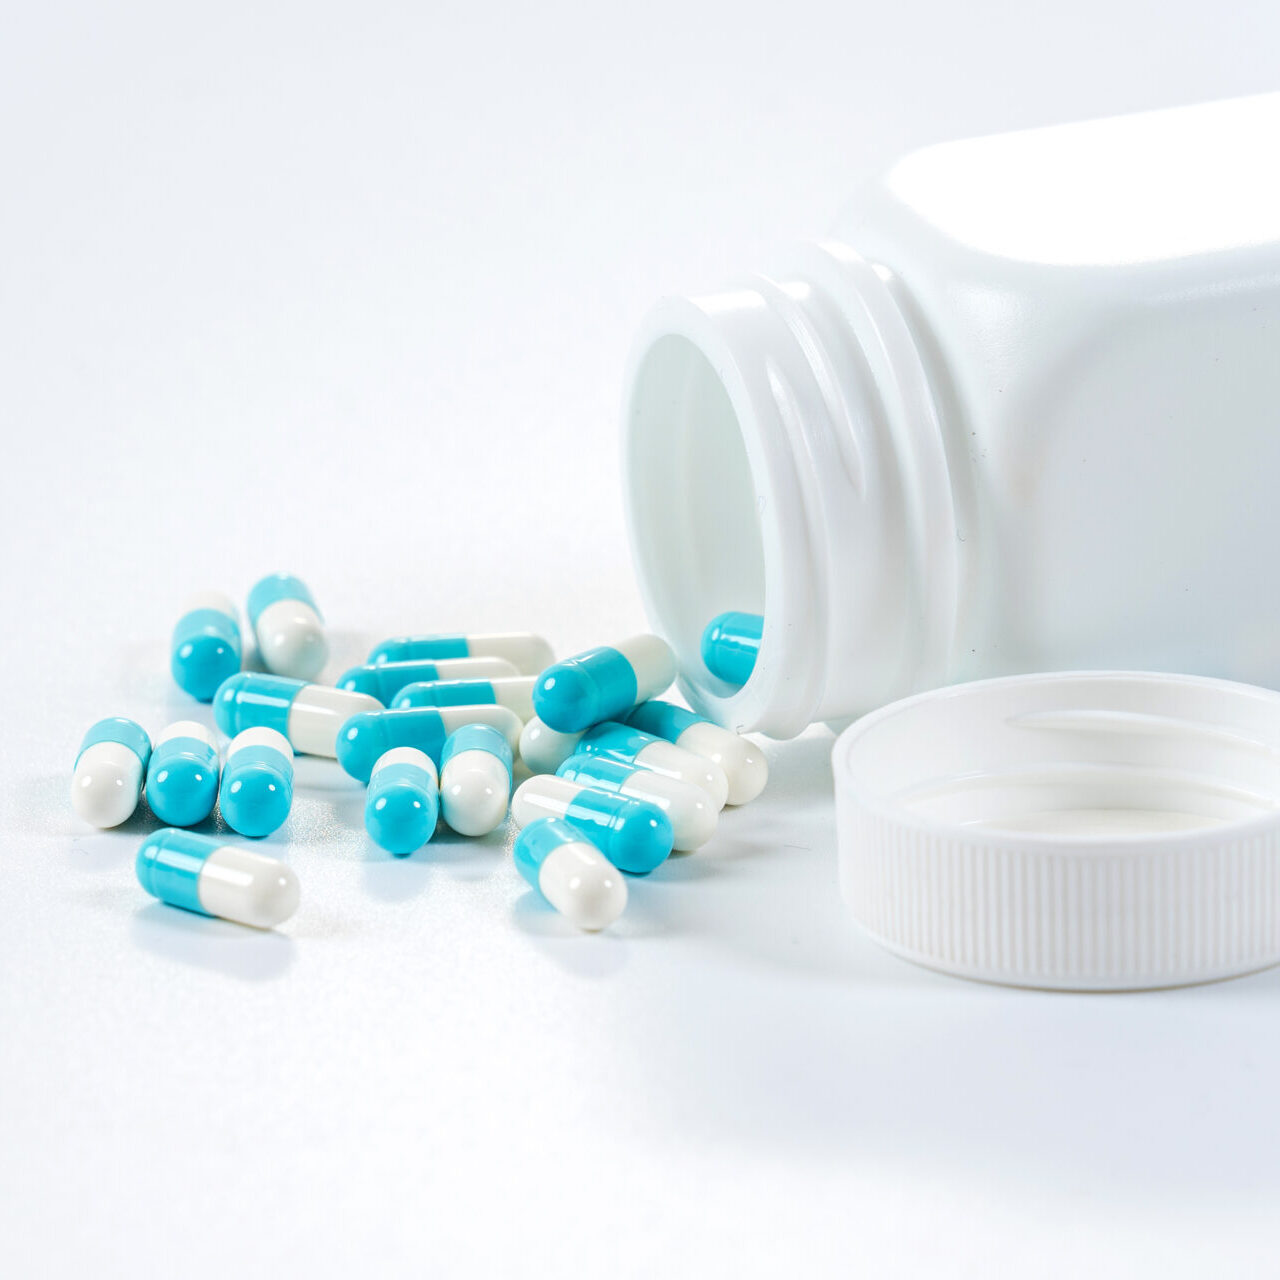 blue-white-capsules-pills-pouring-from-bottle-white-background-scaled.jpg